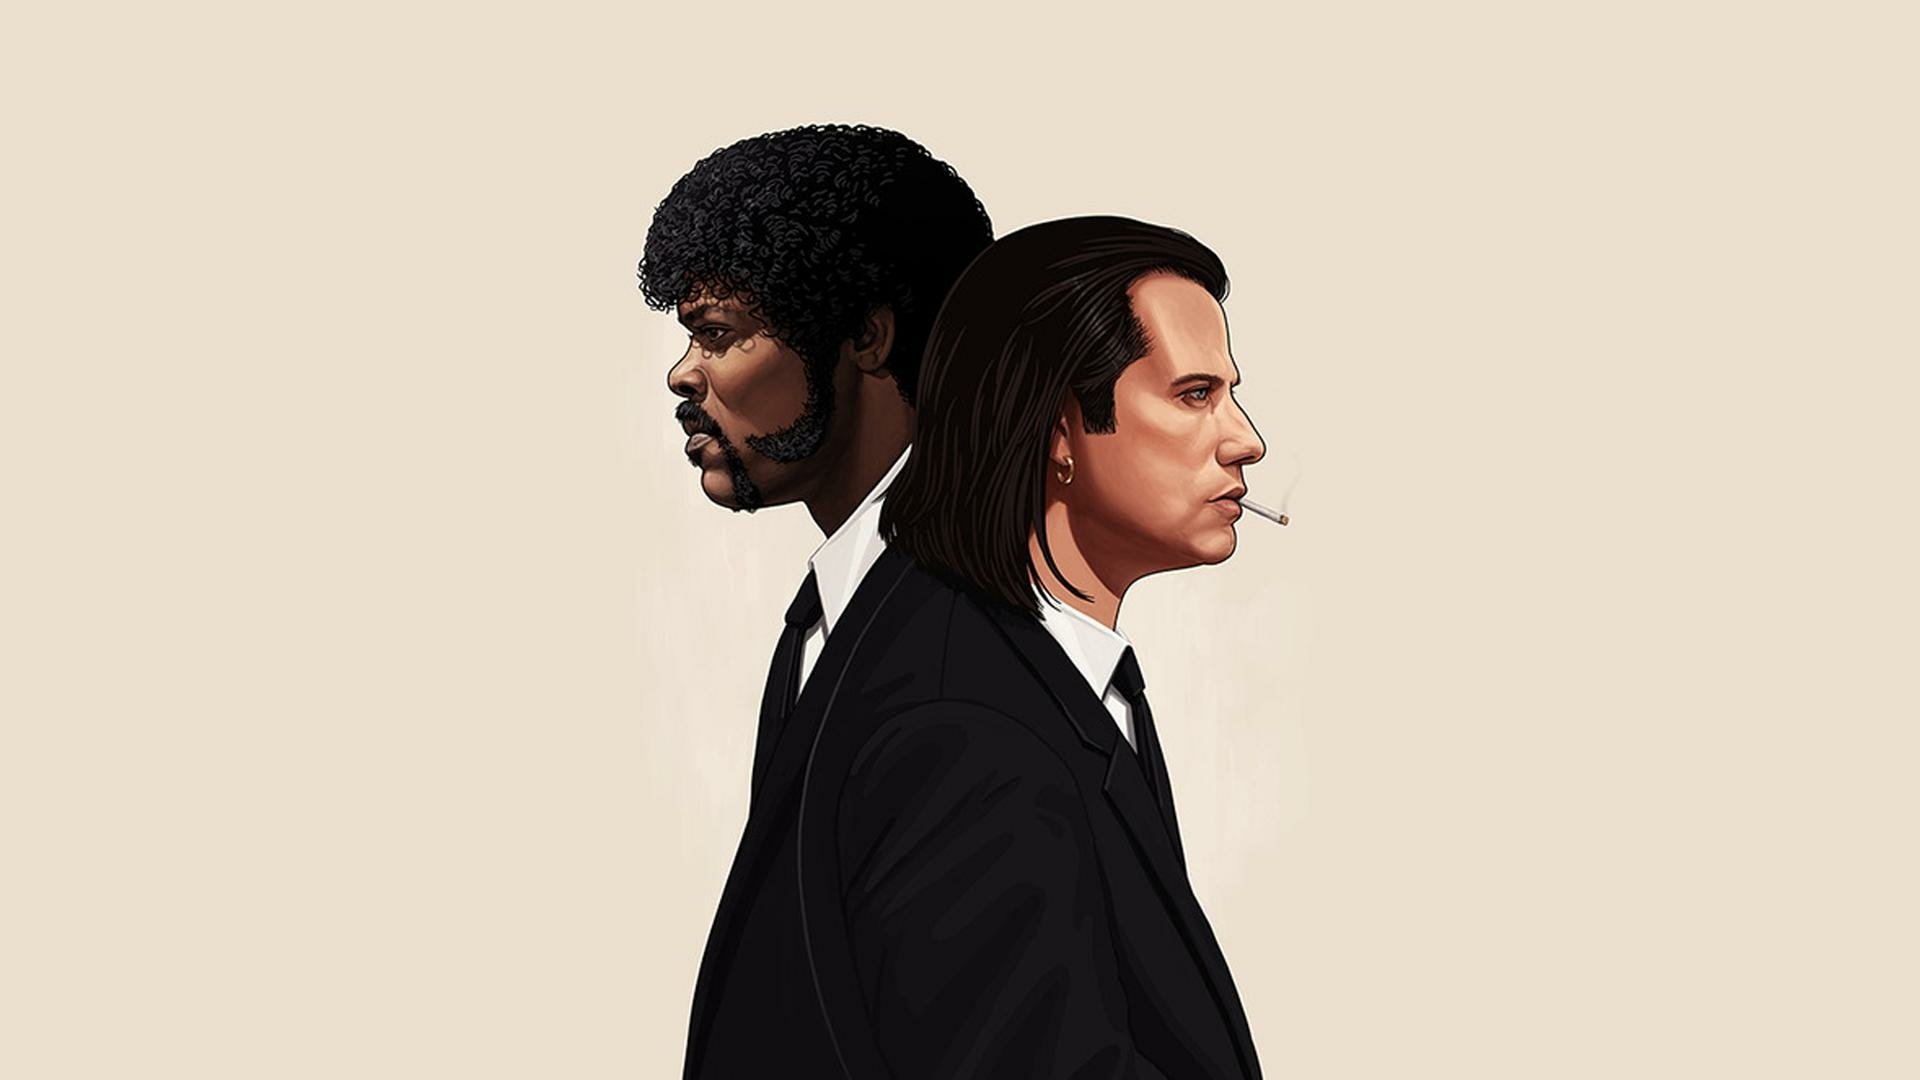 1920x1080 Pulp Fiction Wallpaper Background Image. 